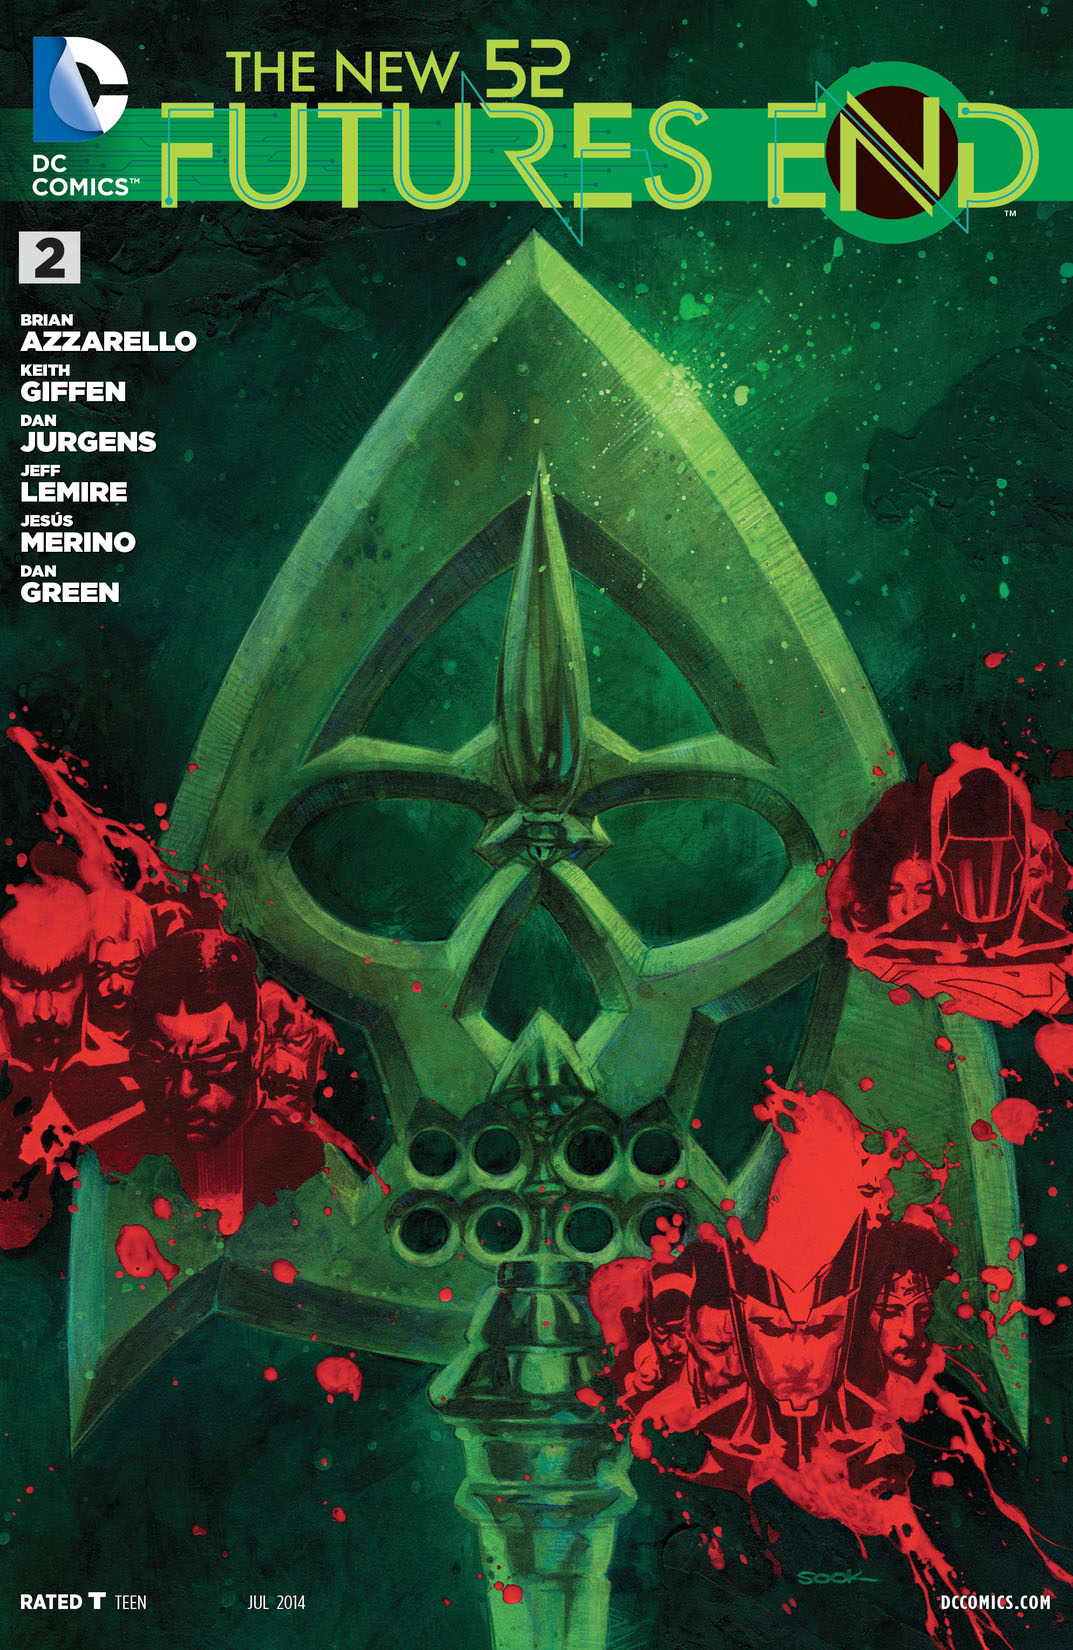 The New 52: Futures End #2 preview images